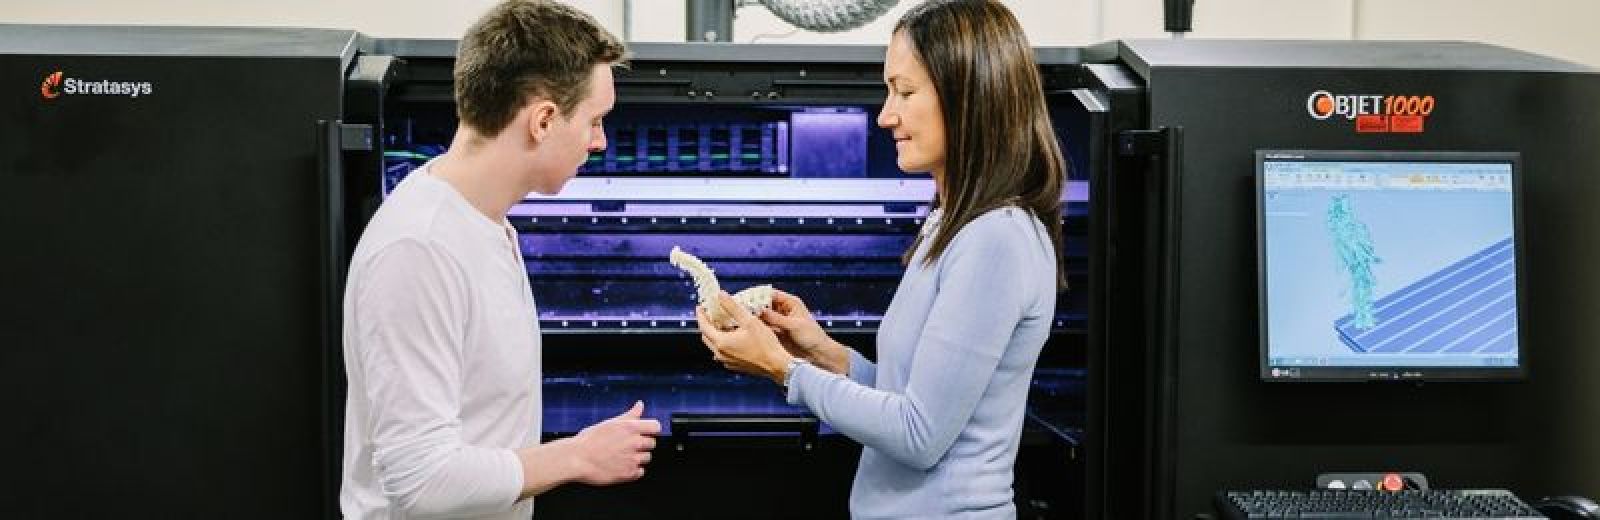 An academic showing a student a 3d printed model in a electronics lab.